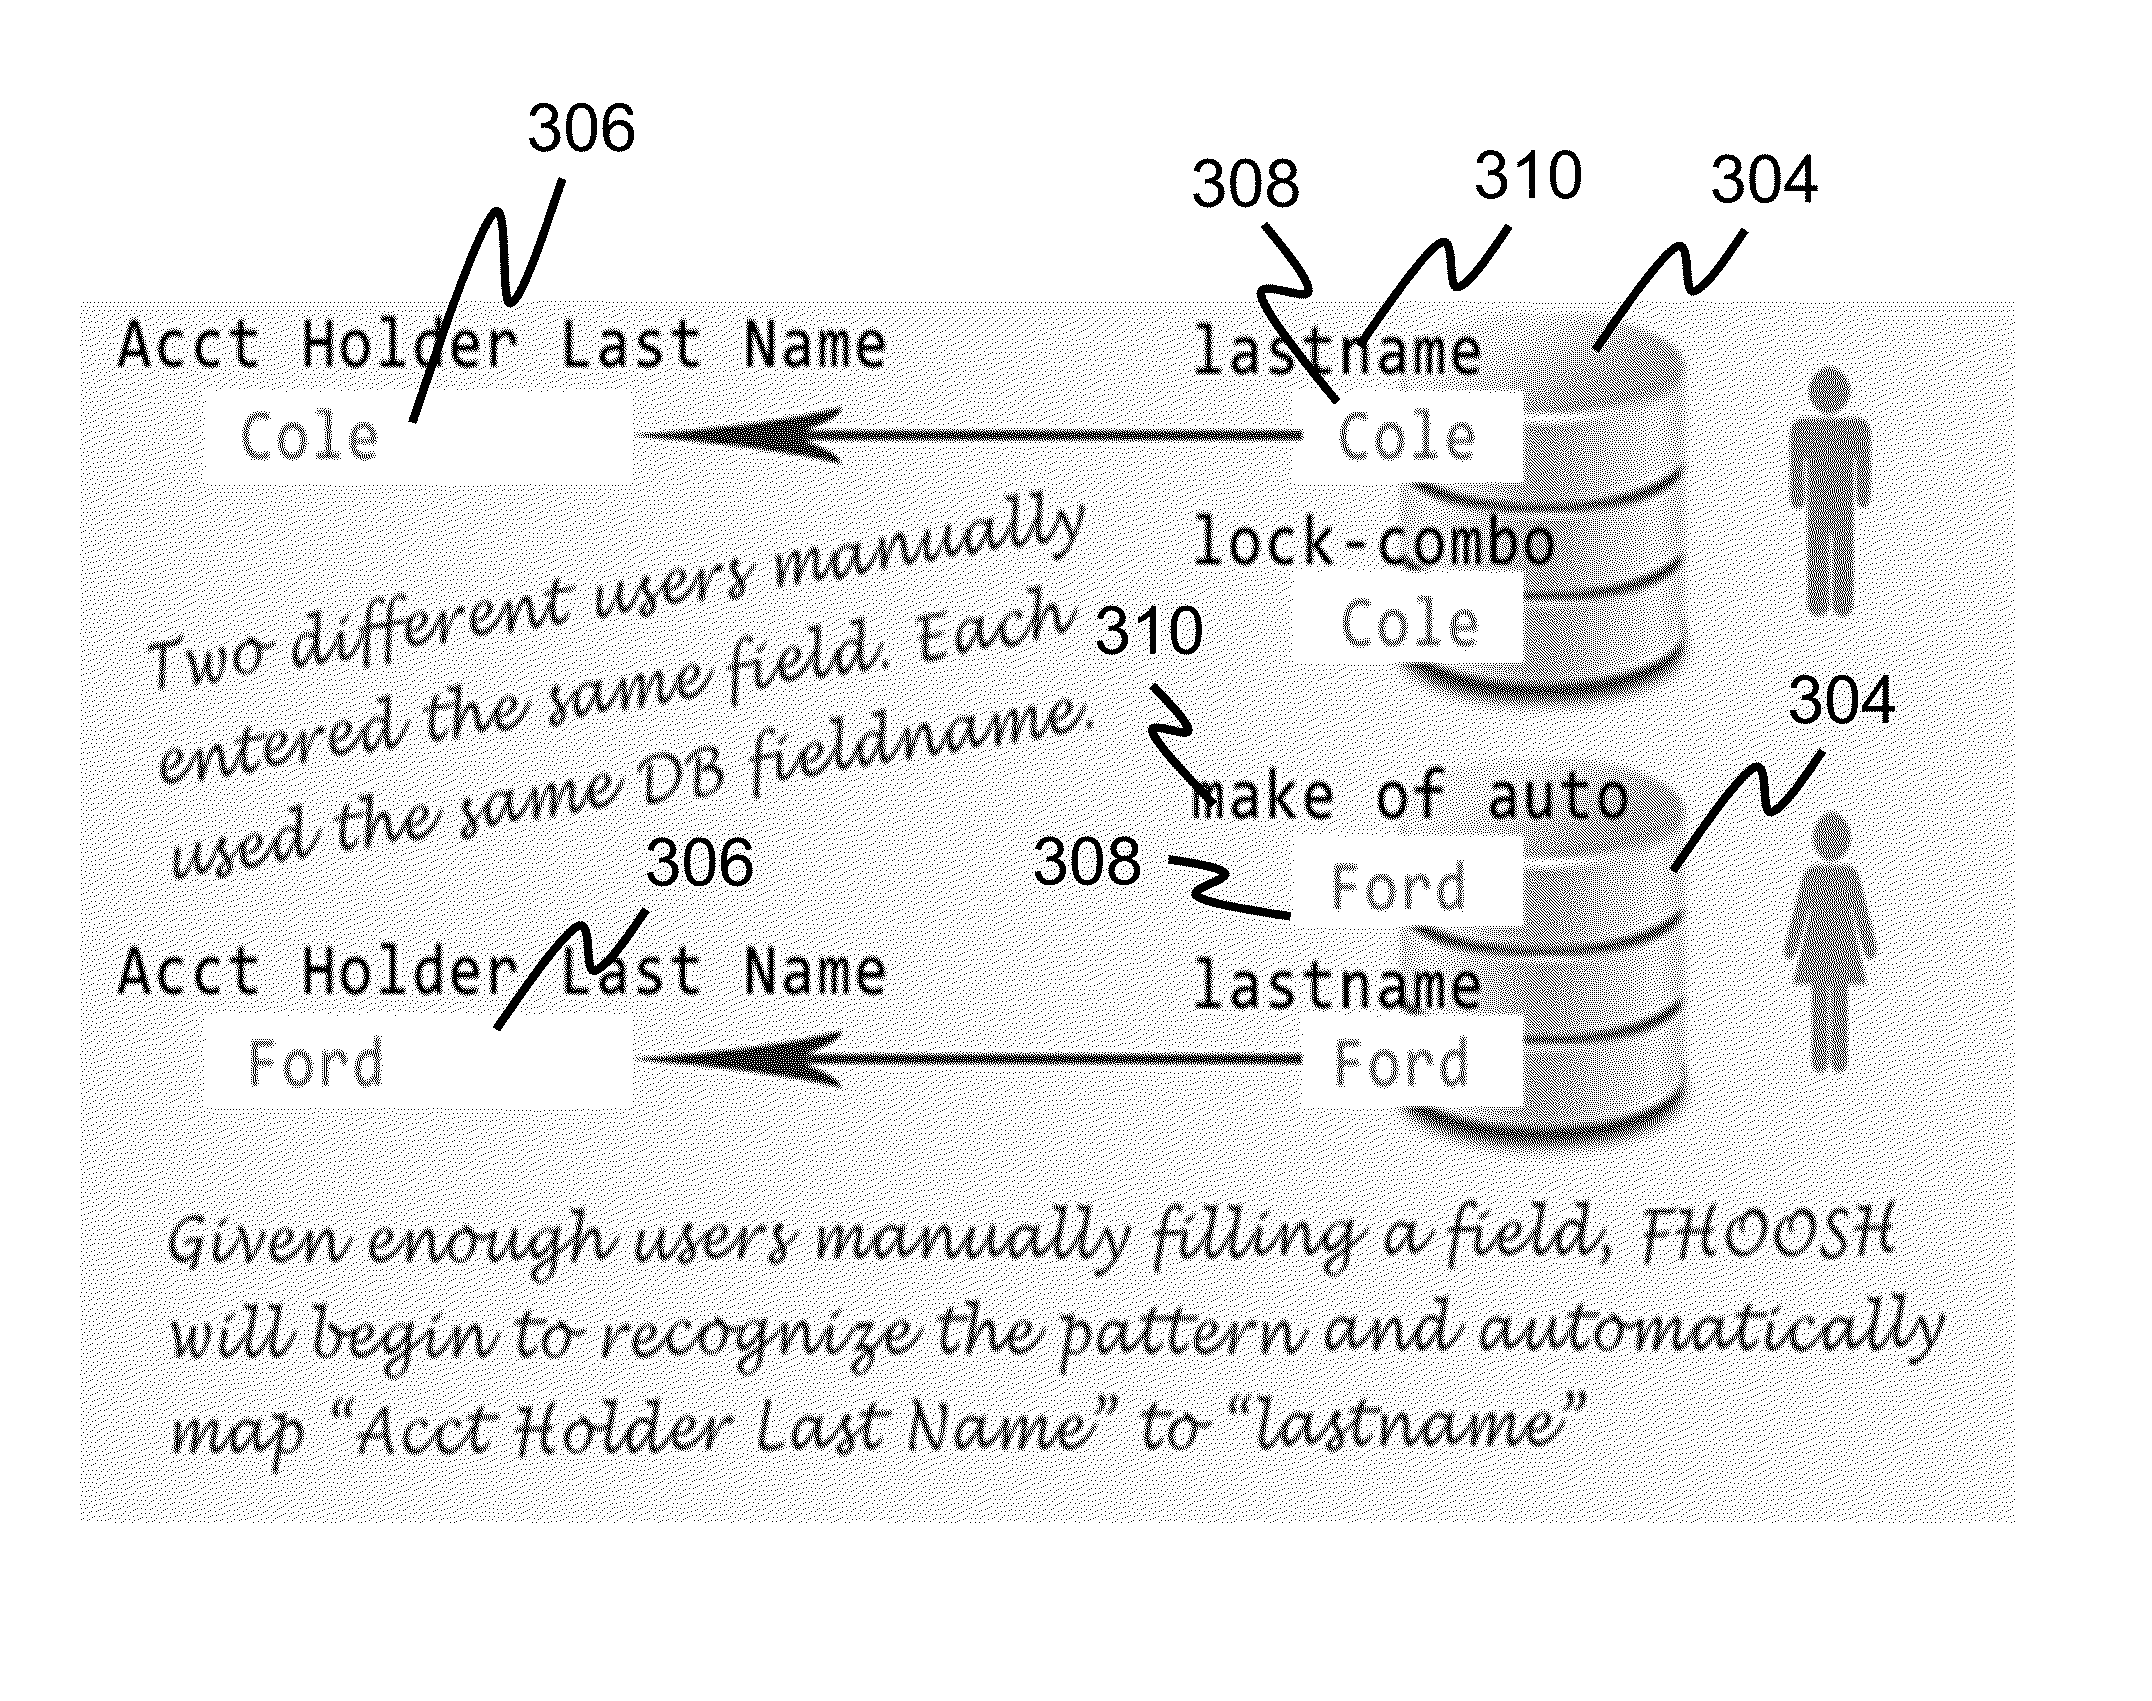 Systems and methods for locating, identifying and mapping electronic form fields